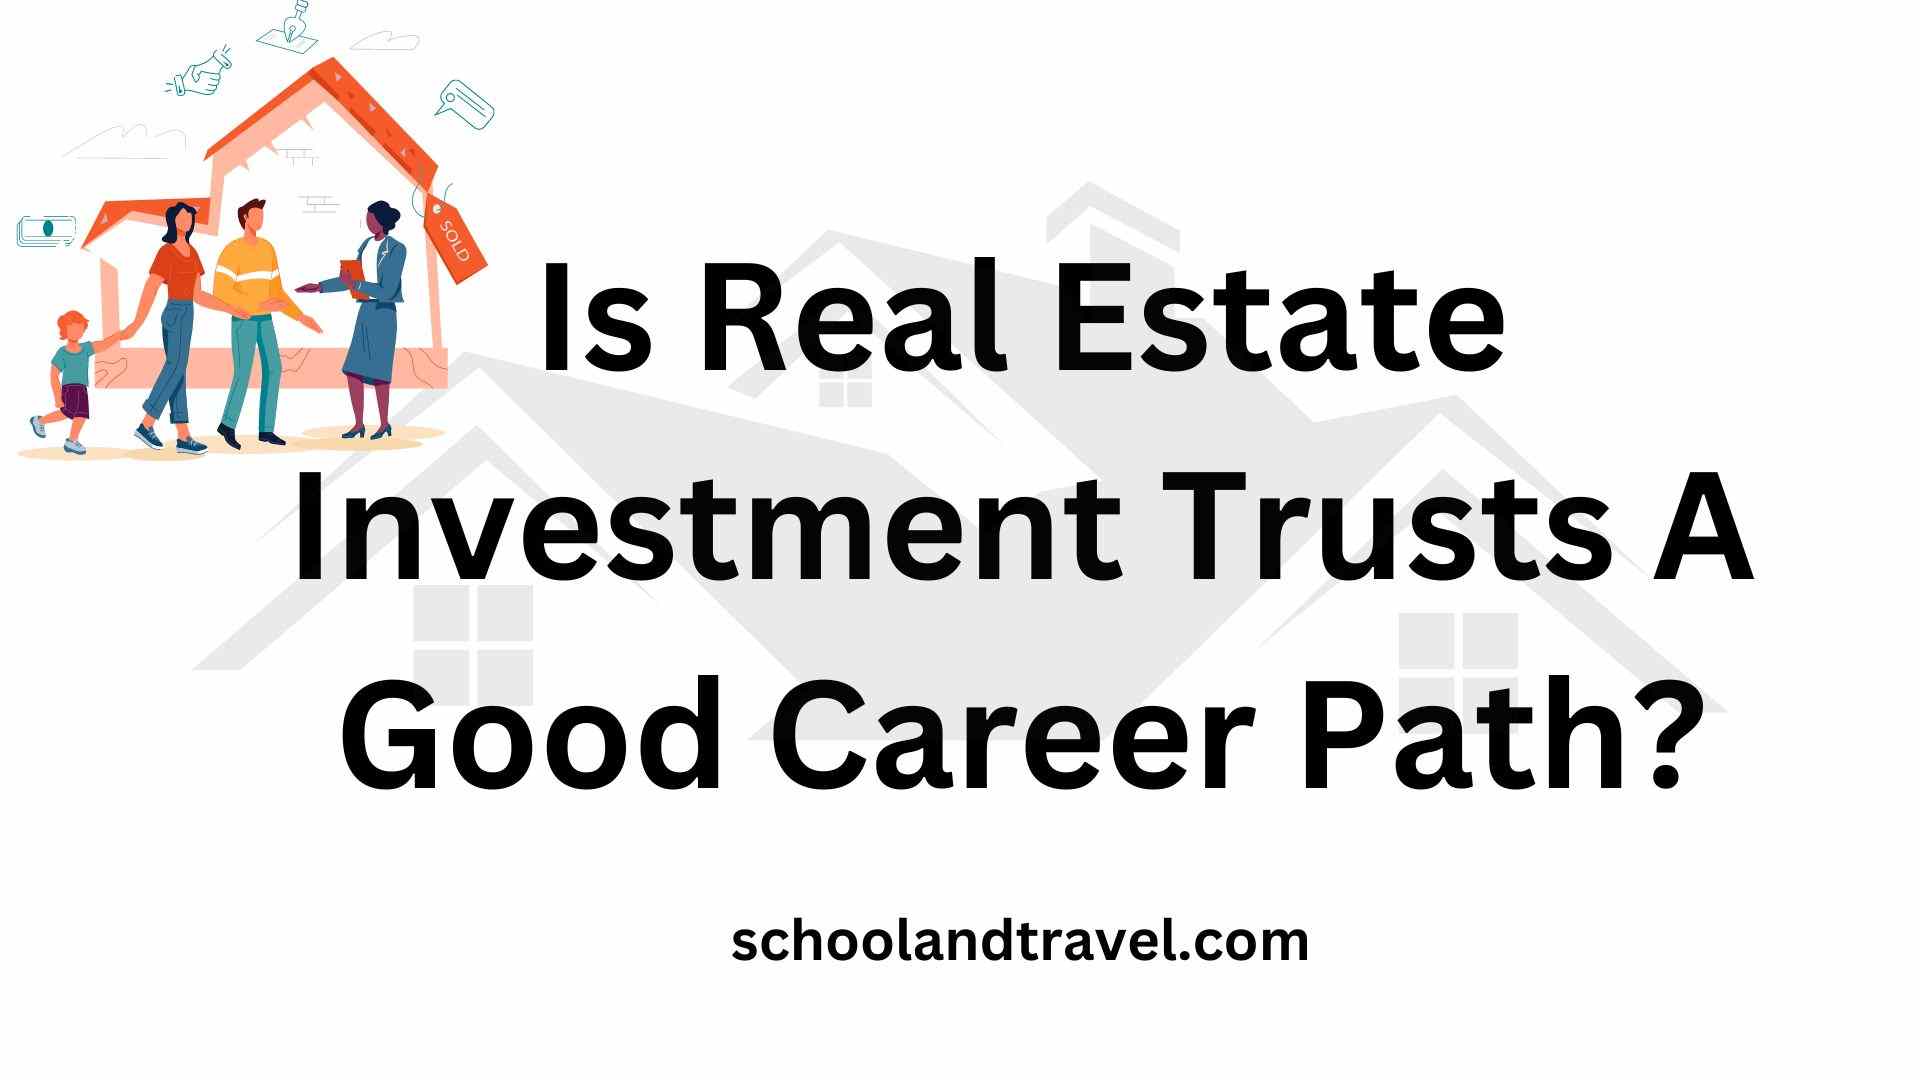 Is Real Estate Investment Trusts A Good Career Path?